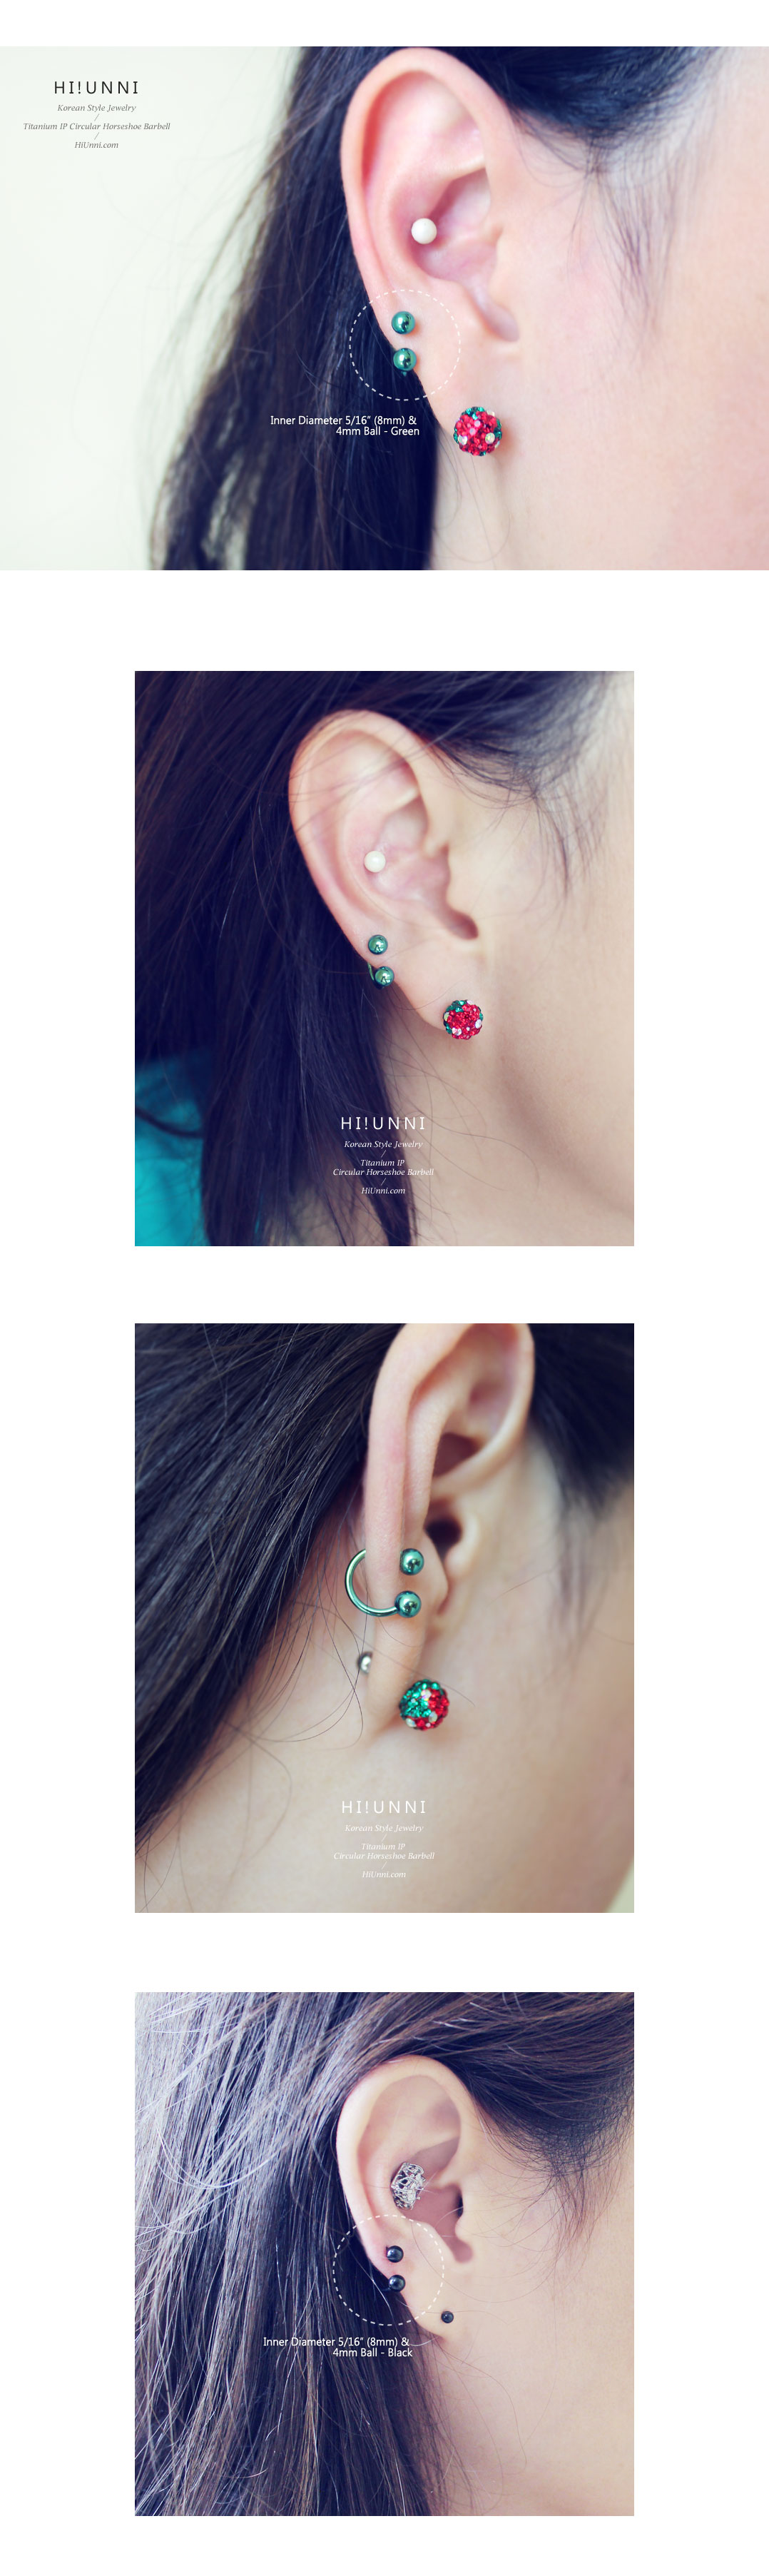 ear_studs_piercing_cartilage_earrings_16g_316l_surgical_stainless_steel_korean_asian_style_jewelry_horseshoe_circular_barbell_titanium_5